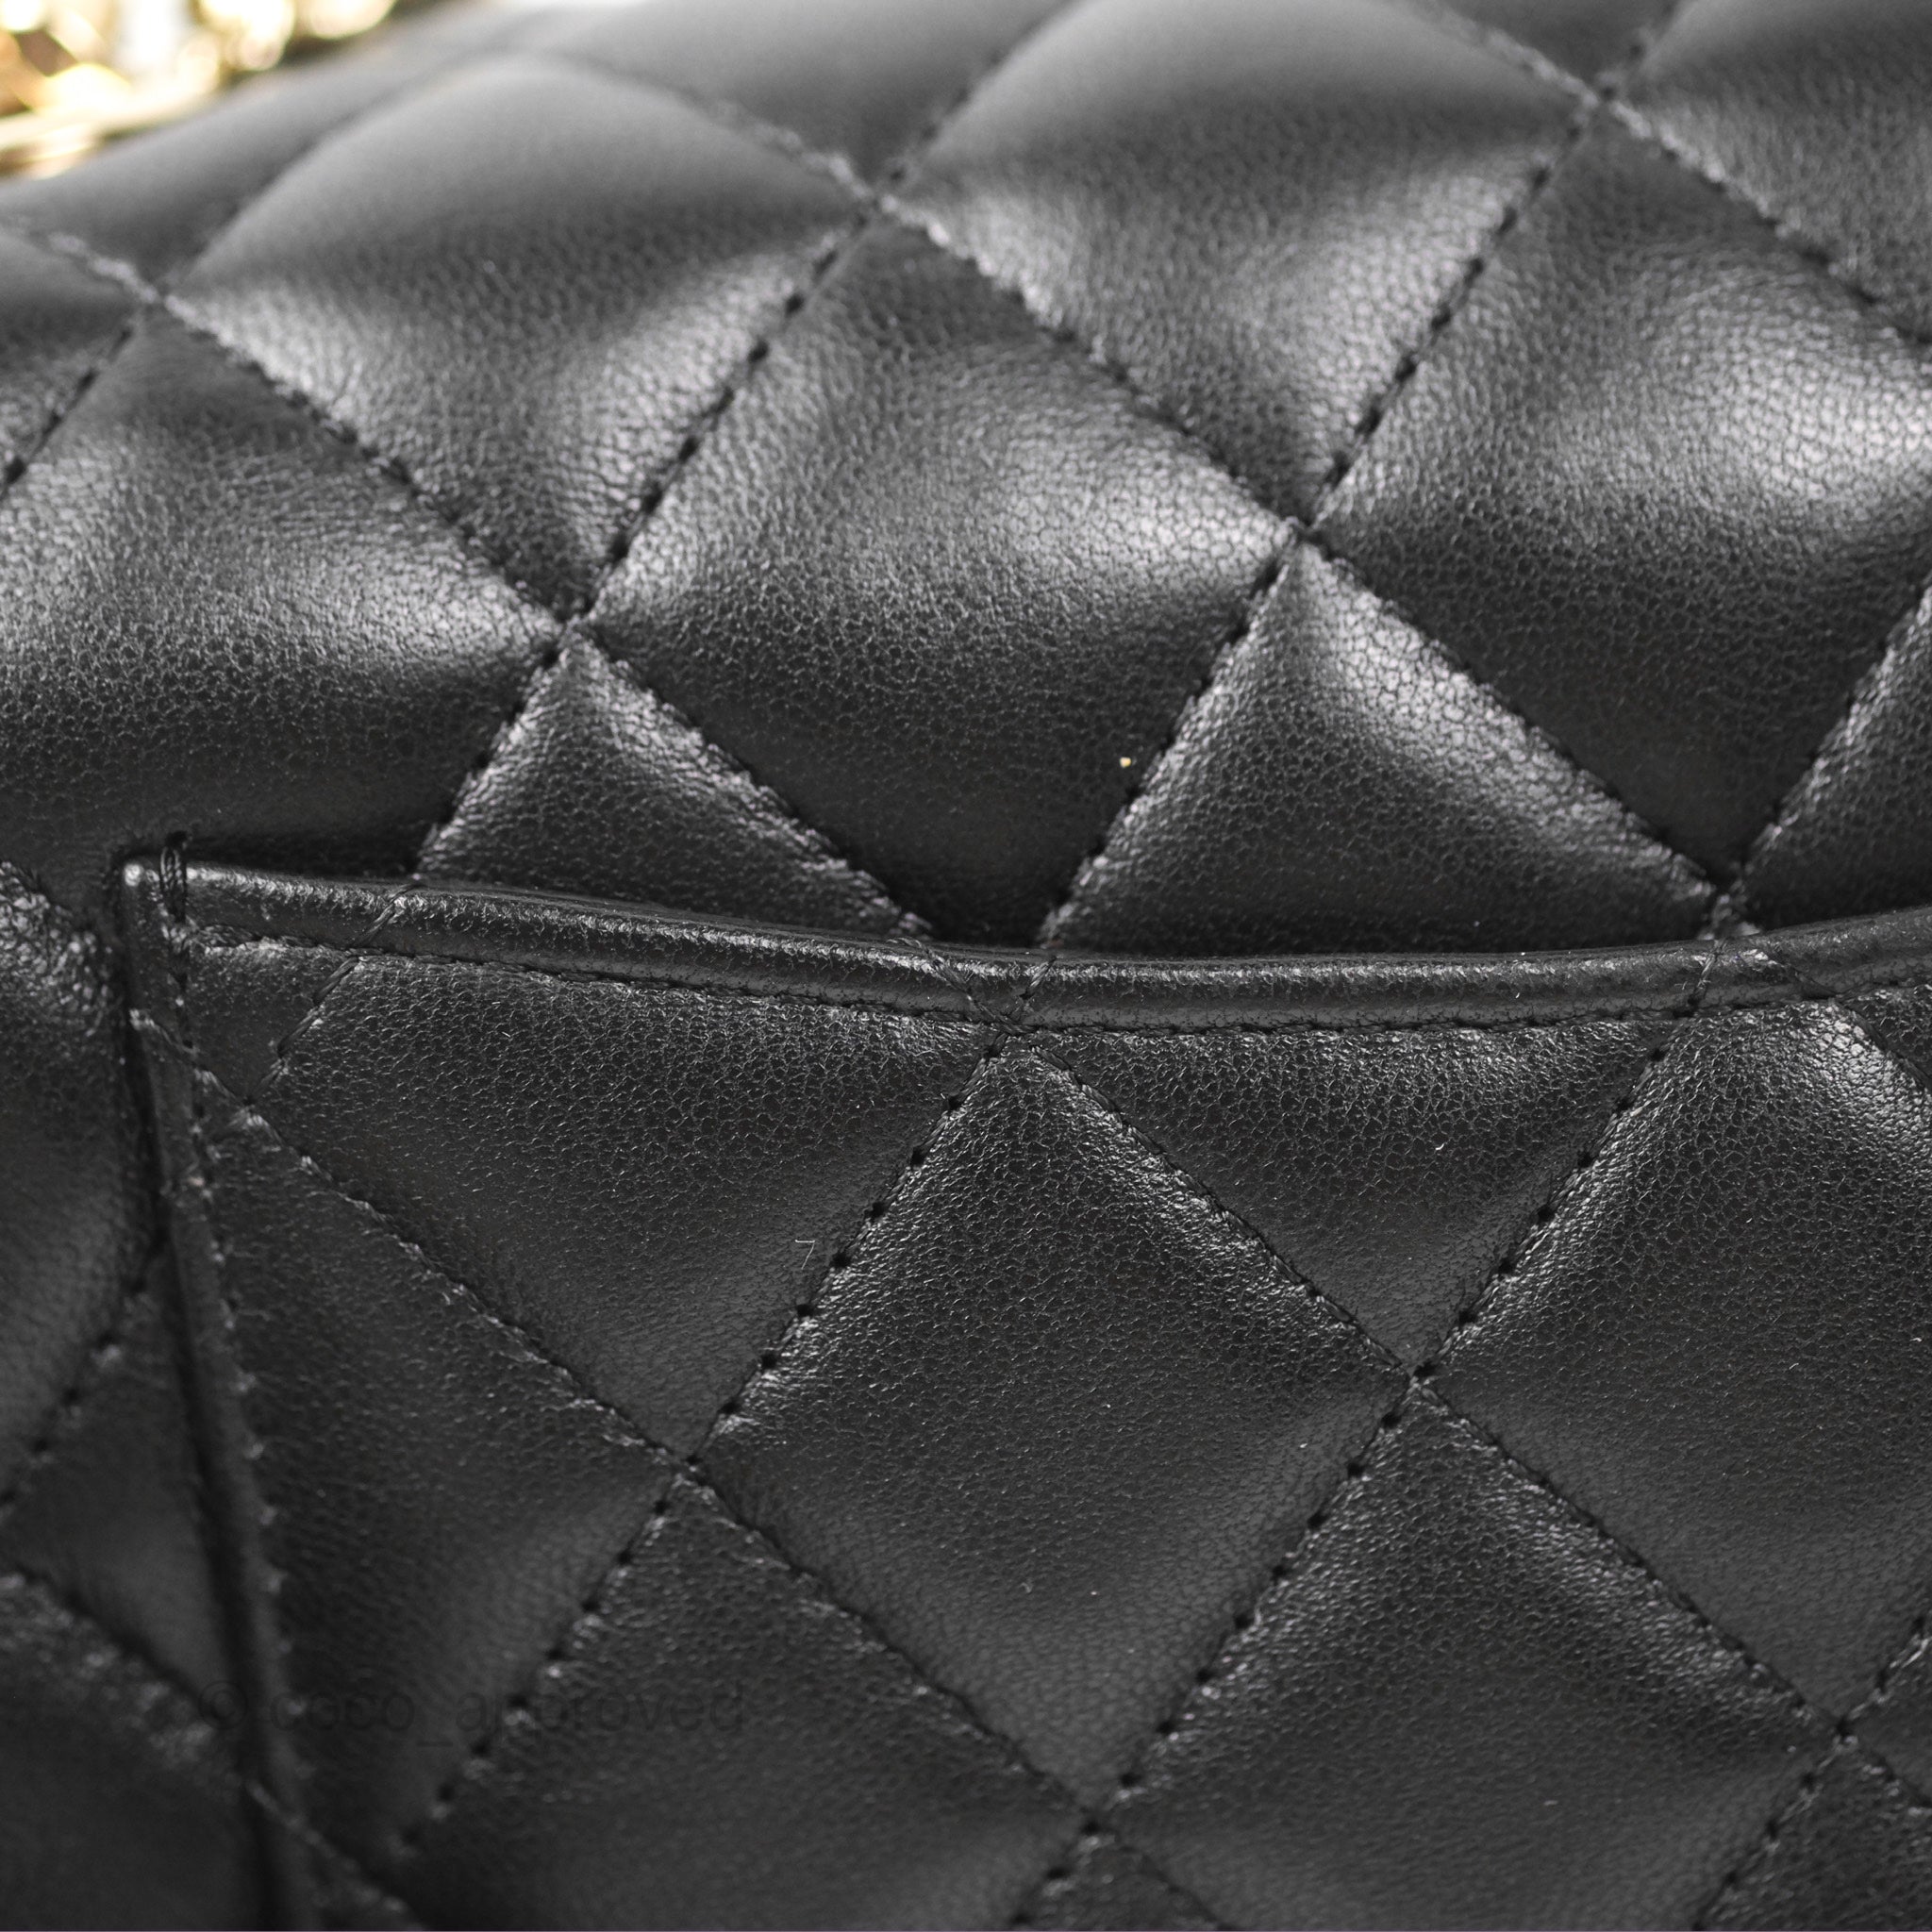 Chanel Quilted Mini Rectangular Flap With Charms Black Lambskin Gold H –  Coco Approved Studio